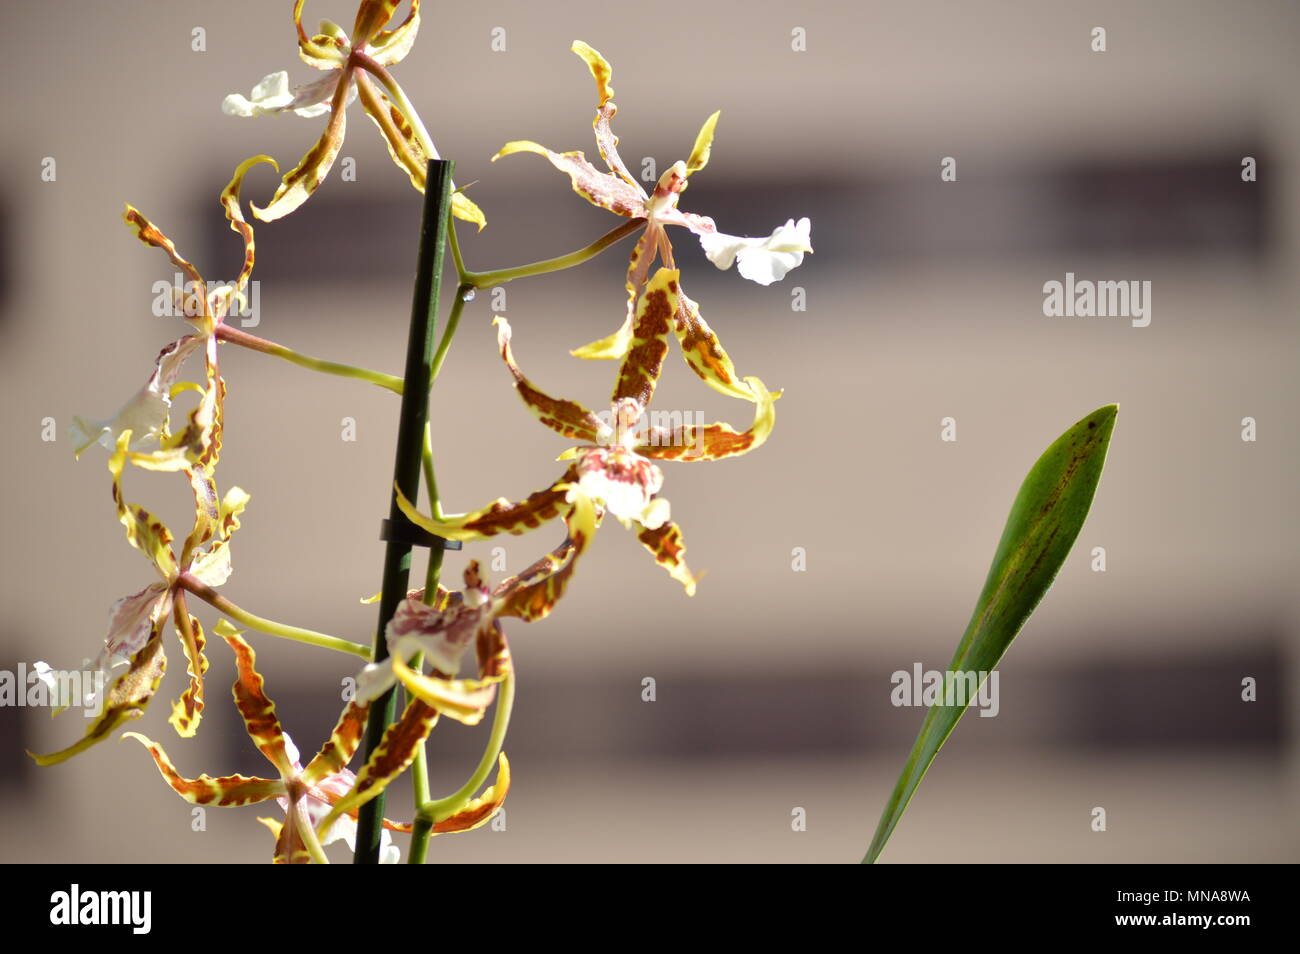 Orchid Brassia Tessa Yellow And Brown Photograph Of Various Flowers On A Stick. Nature Orchid Botanica Biology Phytology Flowers Plants. May 5, 2018.  Stock Photo